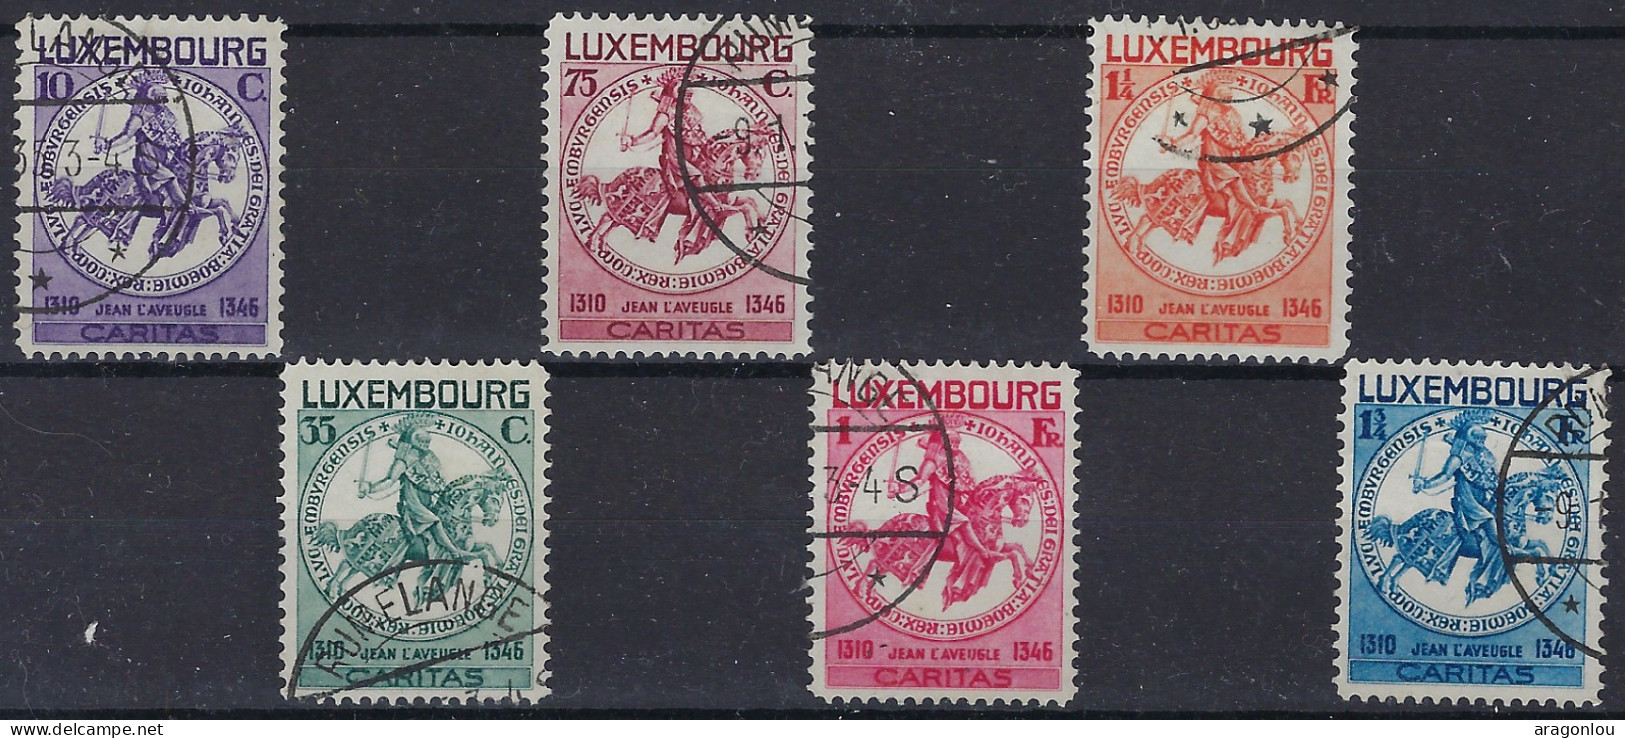 Luxembourg - Luxemburg - Timbres  1934  Série    Sceau De Jean L'Aveugle    °   VC.200,- - Used Stamps